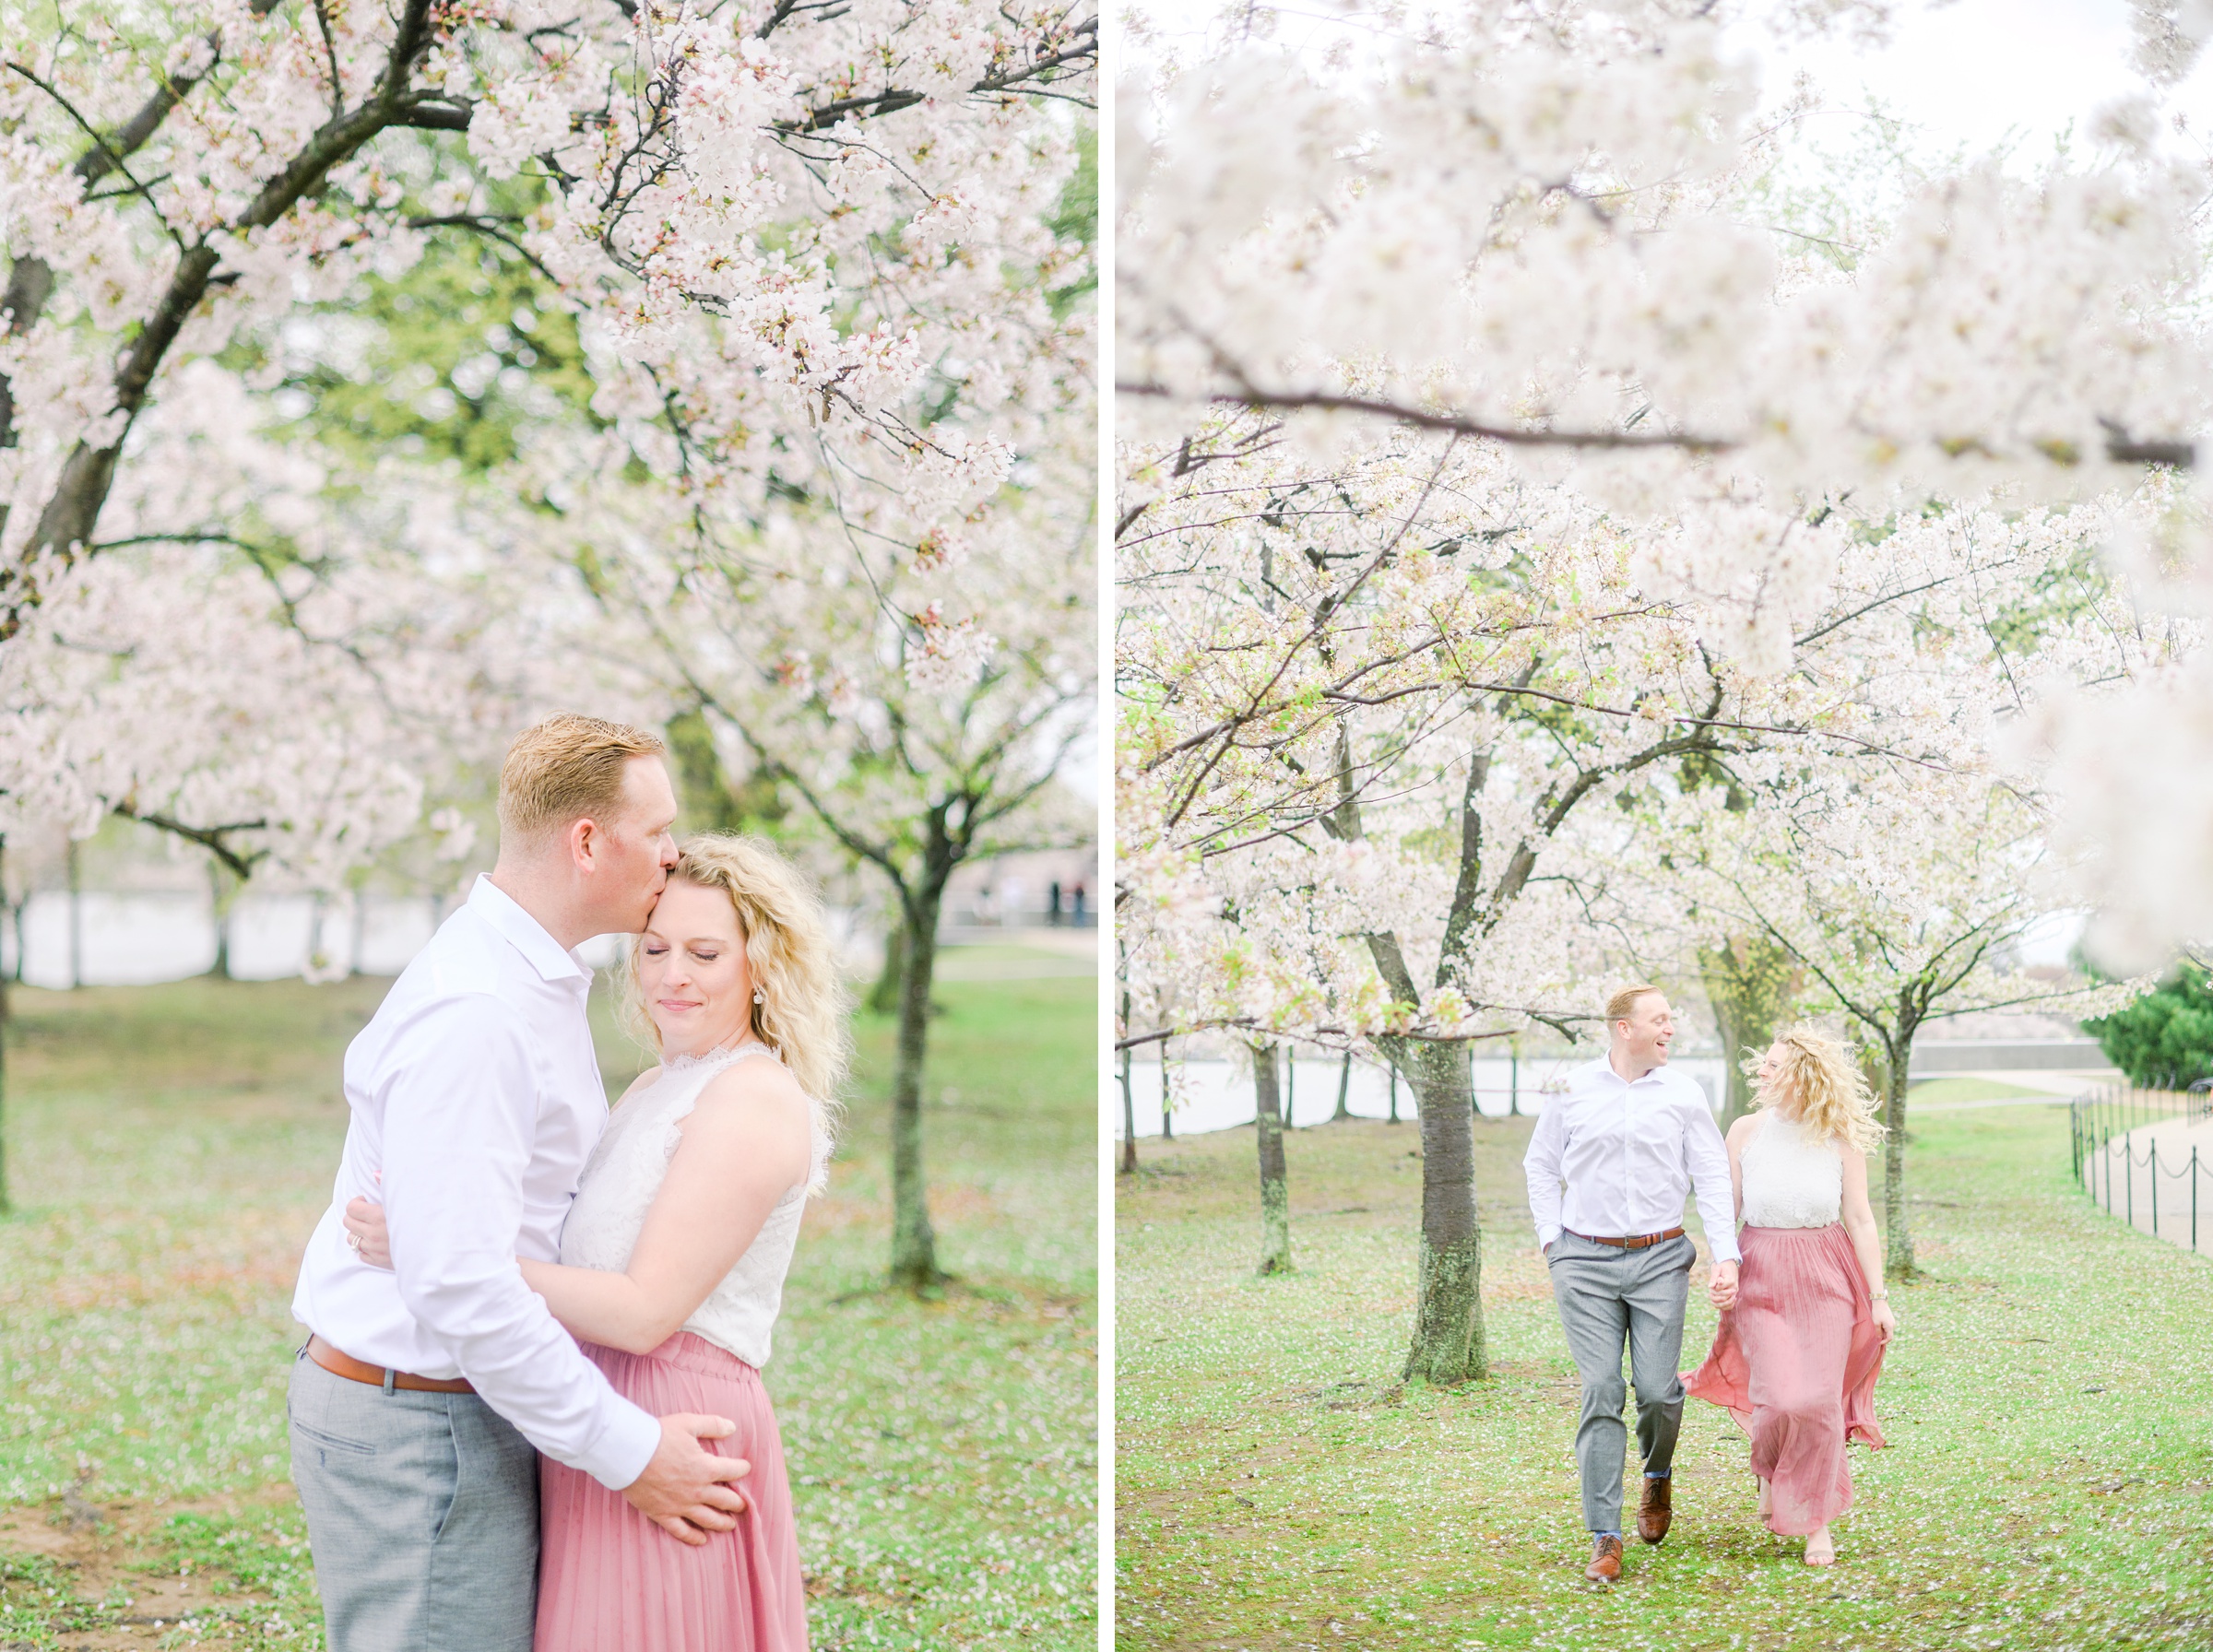 Portrait session at the Jefferson Memorial featuring the Washington DC Cherry Blossoms. Photographed by Baltimore Photographer Cait Kramer Photography